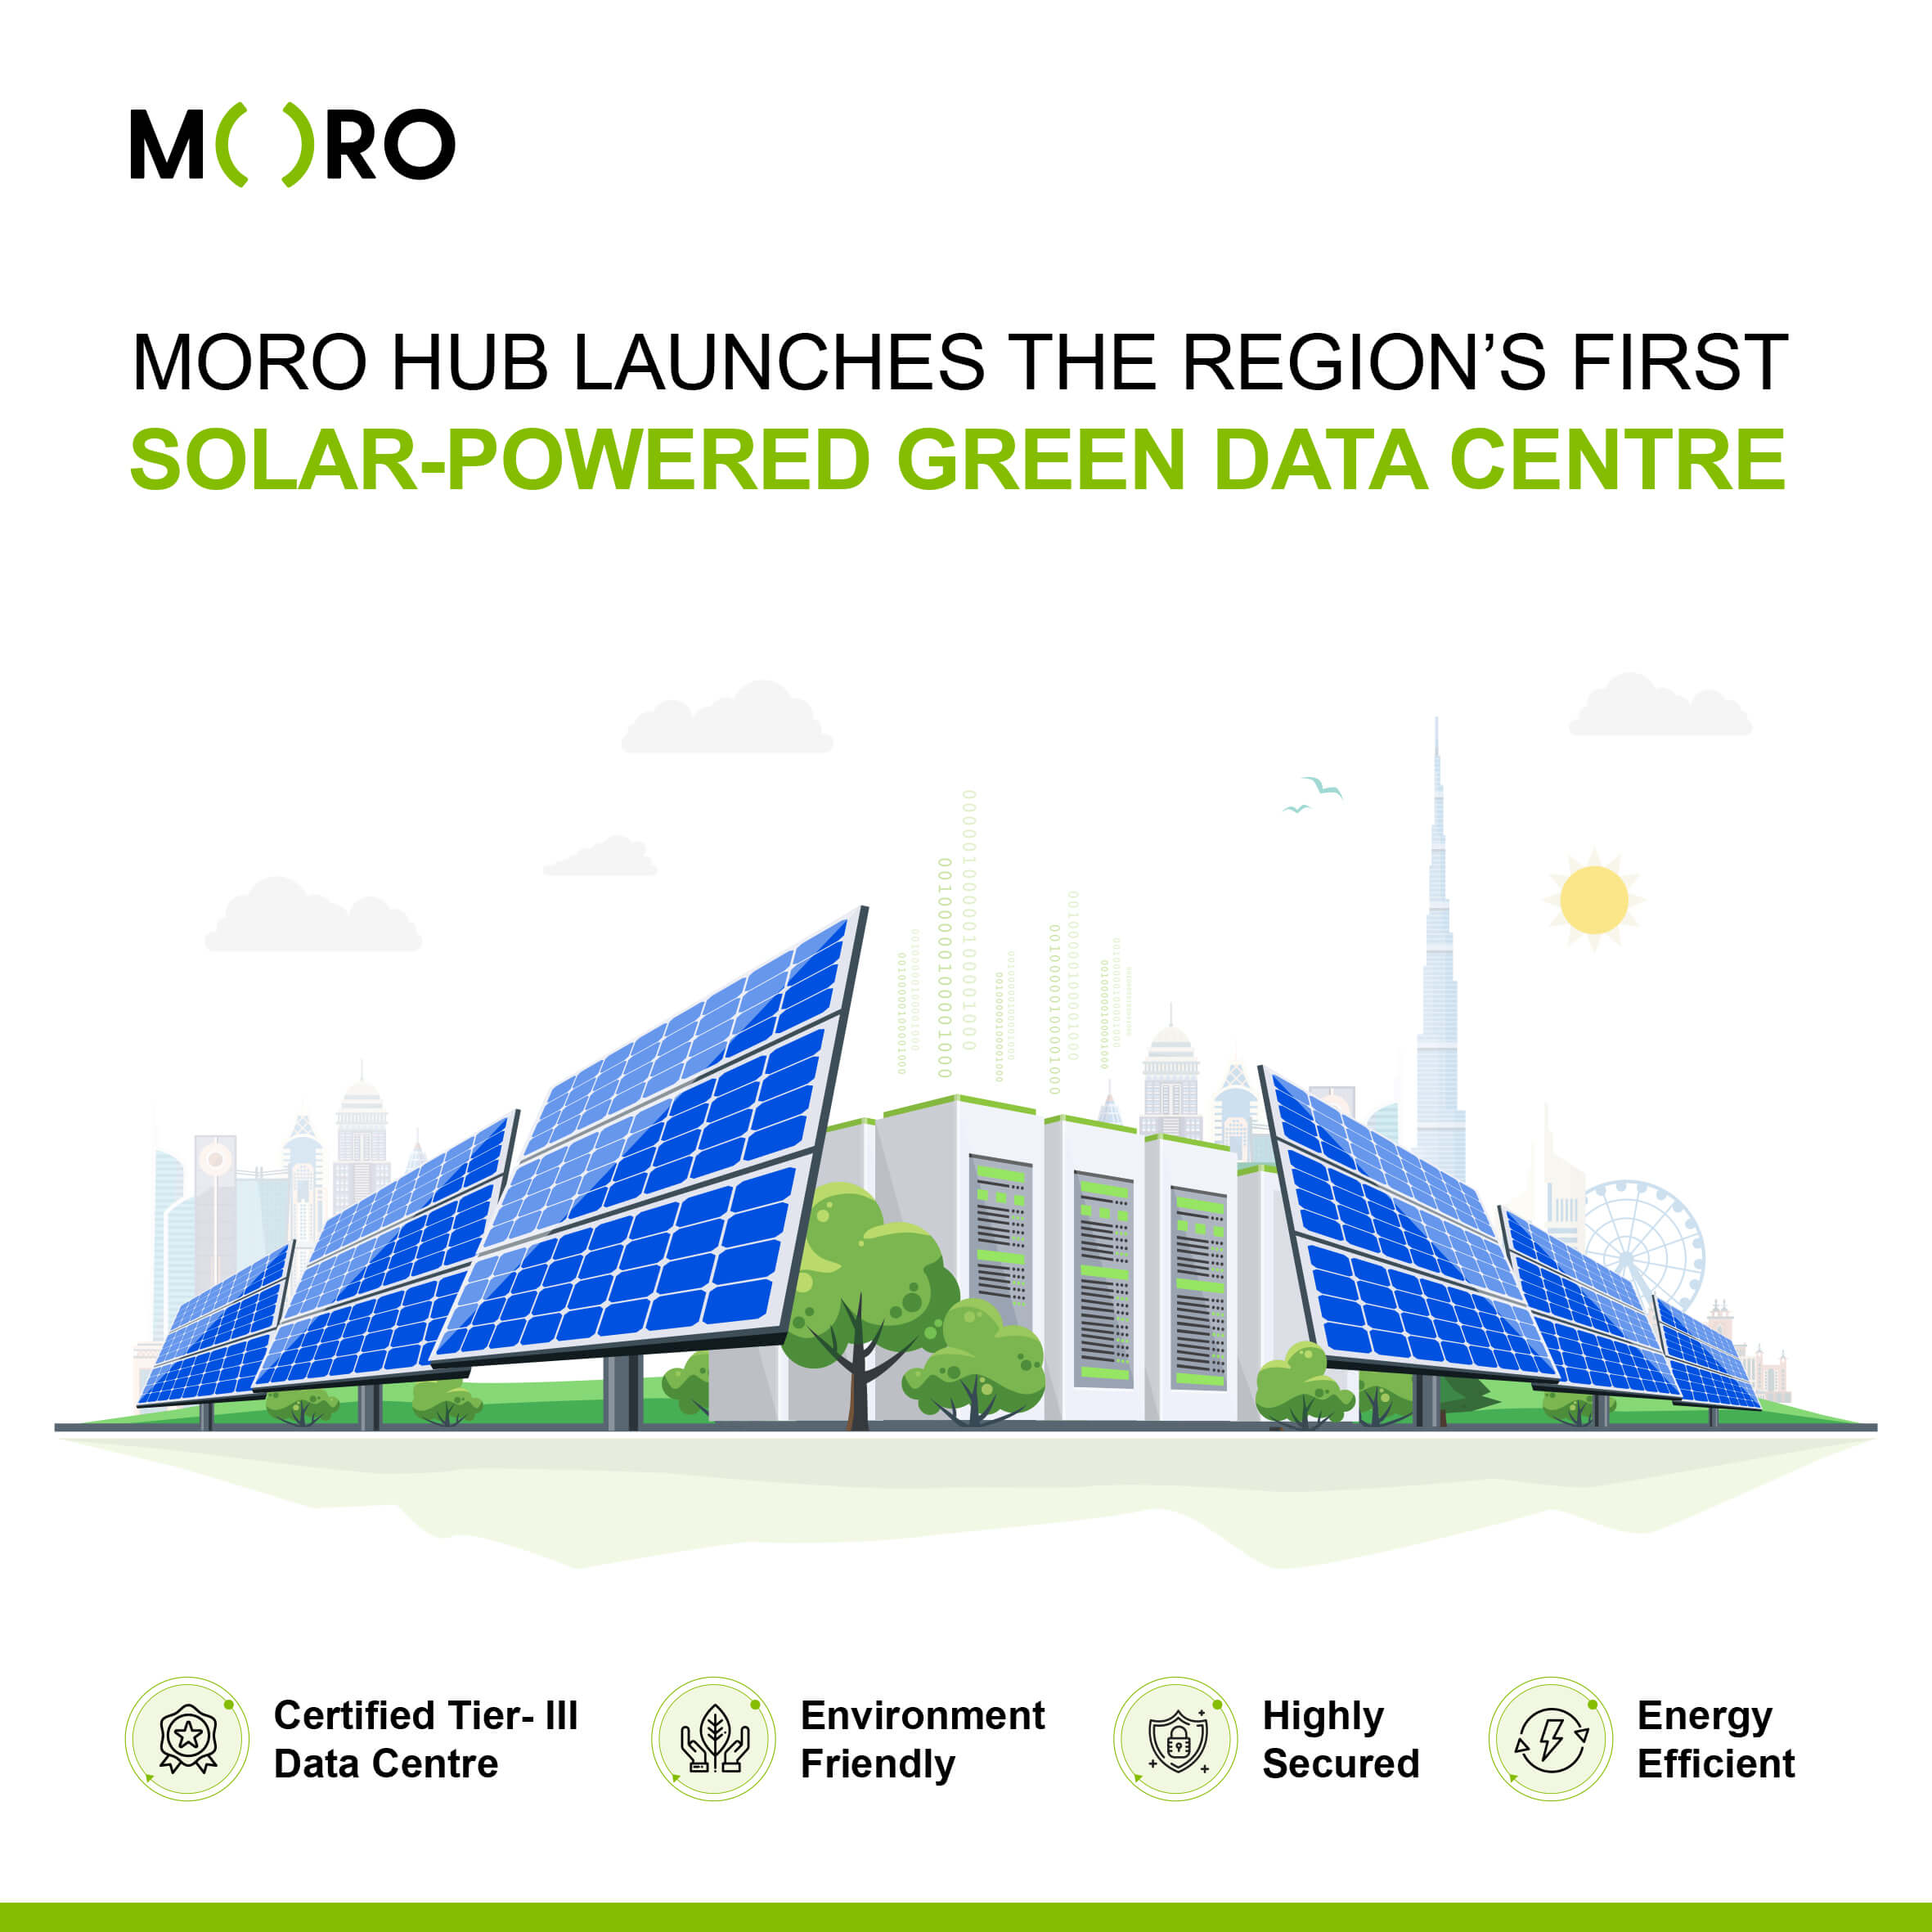 Moro Hub launches the region’s first solar-powered Green Data Centre at WETEX 2020